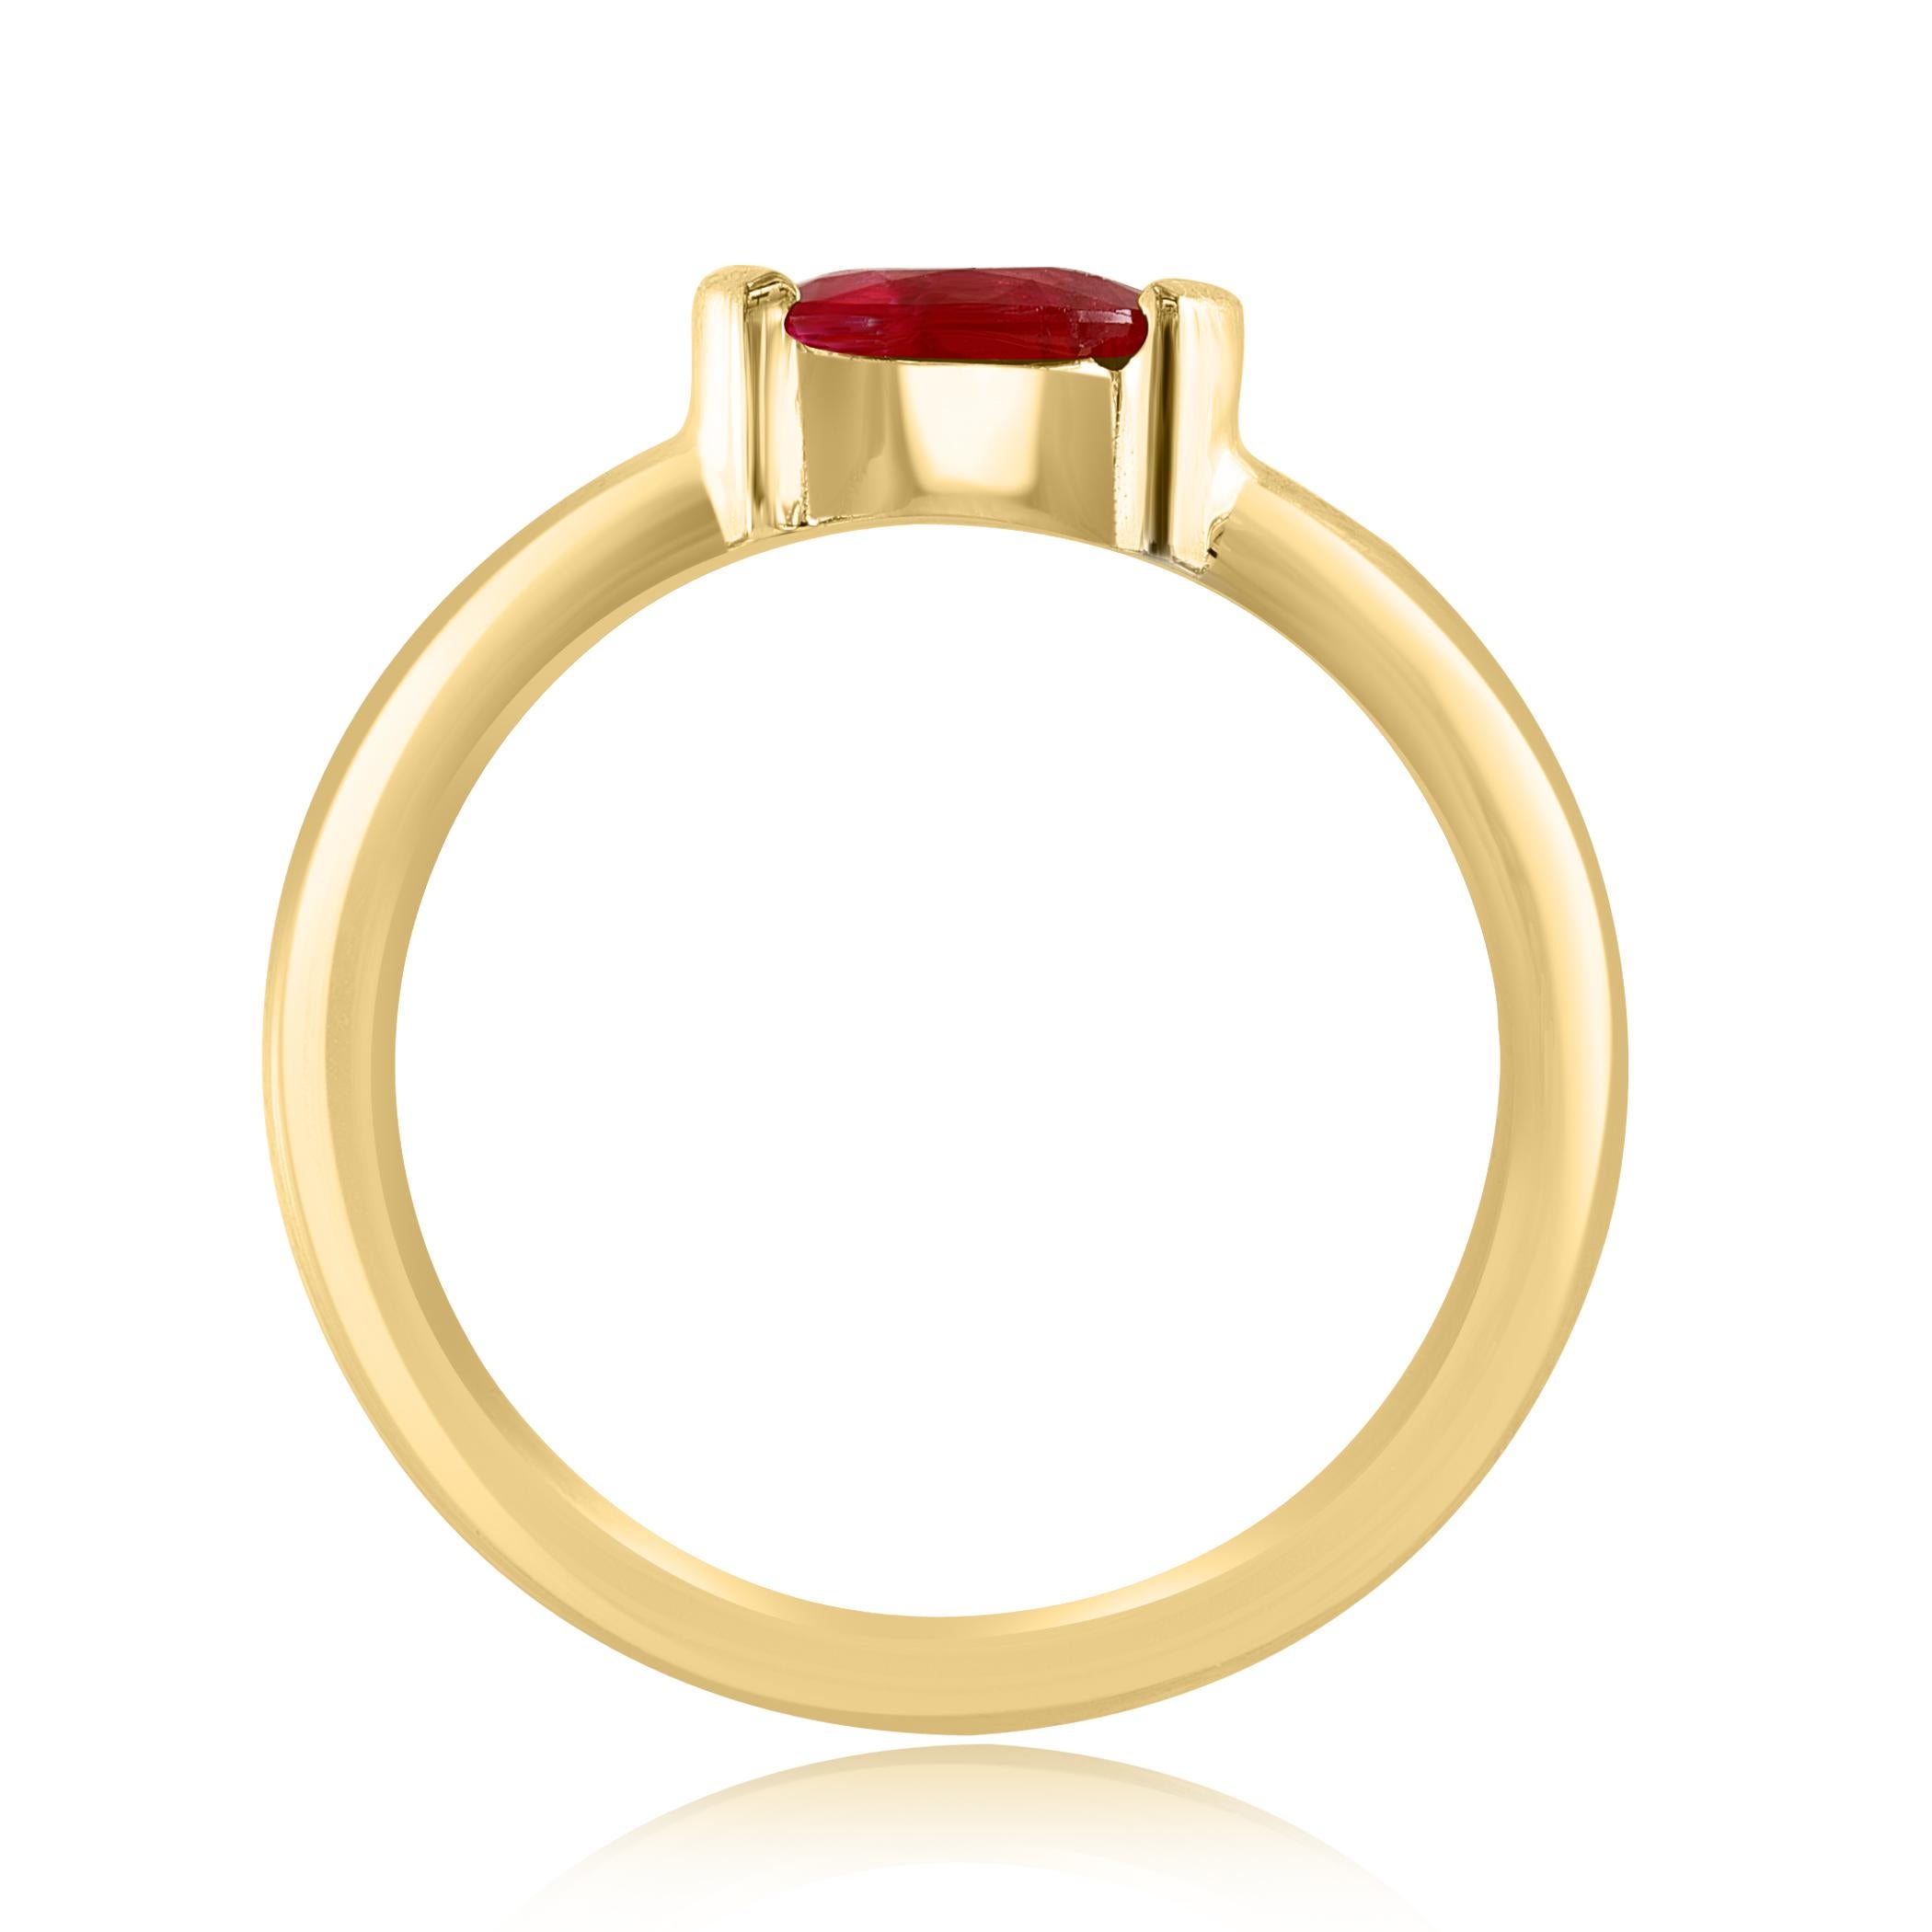 An elegant wedding band ring featuring an astonishing 0.78-carat oval cut ruby, set in a beautiful wide 14K yellow gold band. 

Style is available in different price ranges. Prices are based on your selection. Don't hesitate to get in touch with us